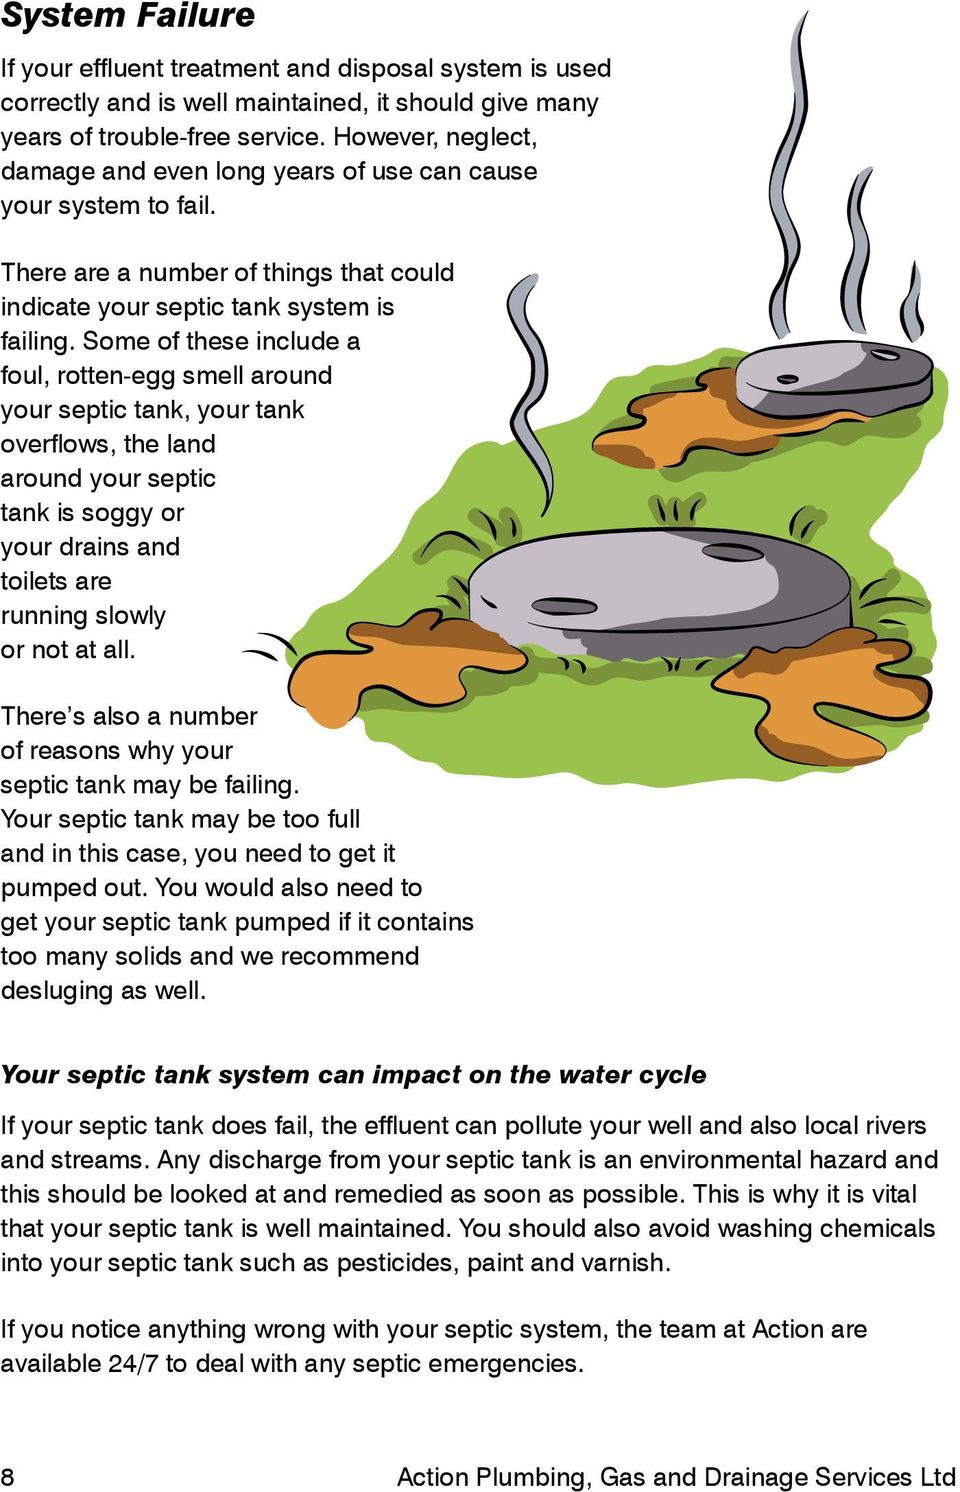 Some of these include a foul, rotten-egg smell around your septic tank, your tank overflows, the land around your septic tank is soggy or your drains and toilets are running slowly or not at all.